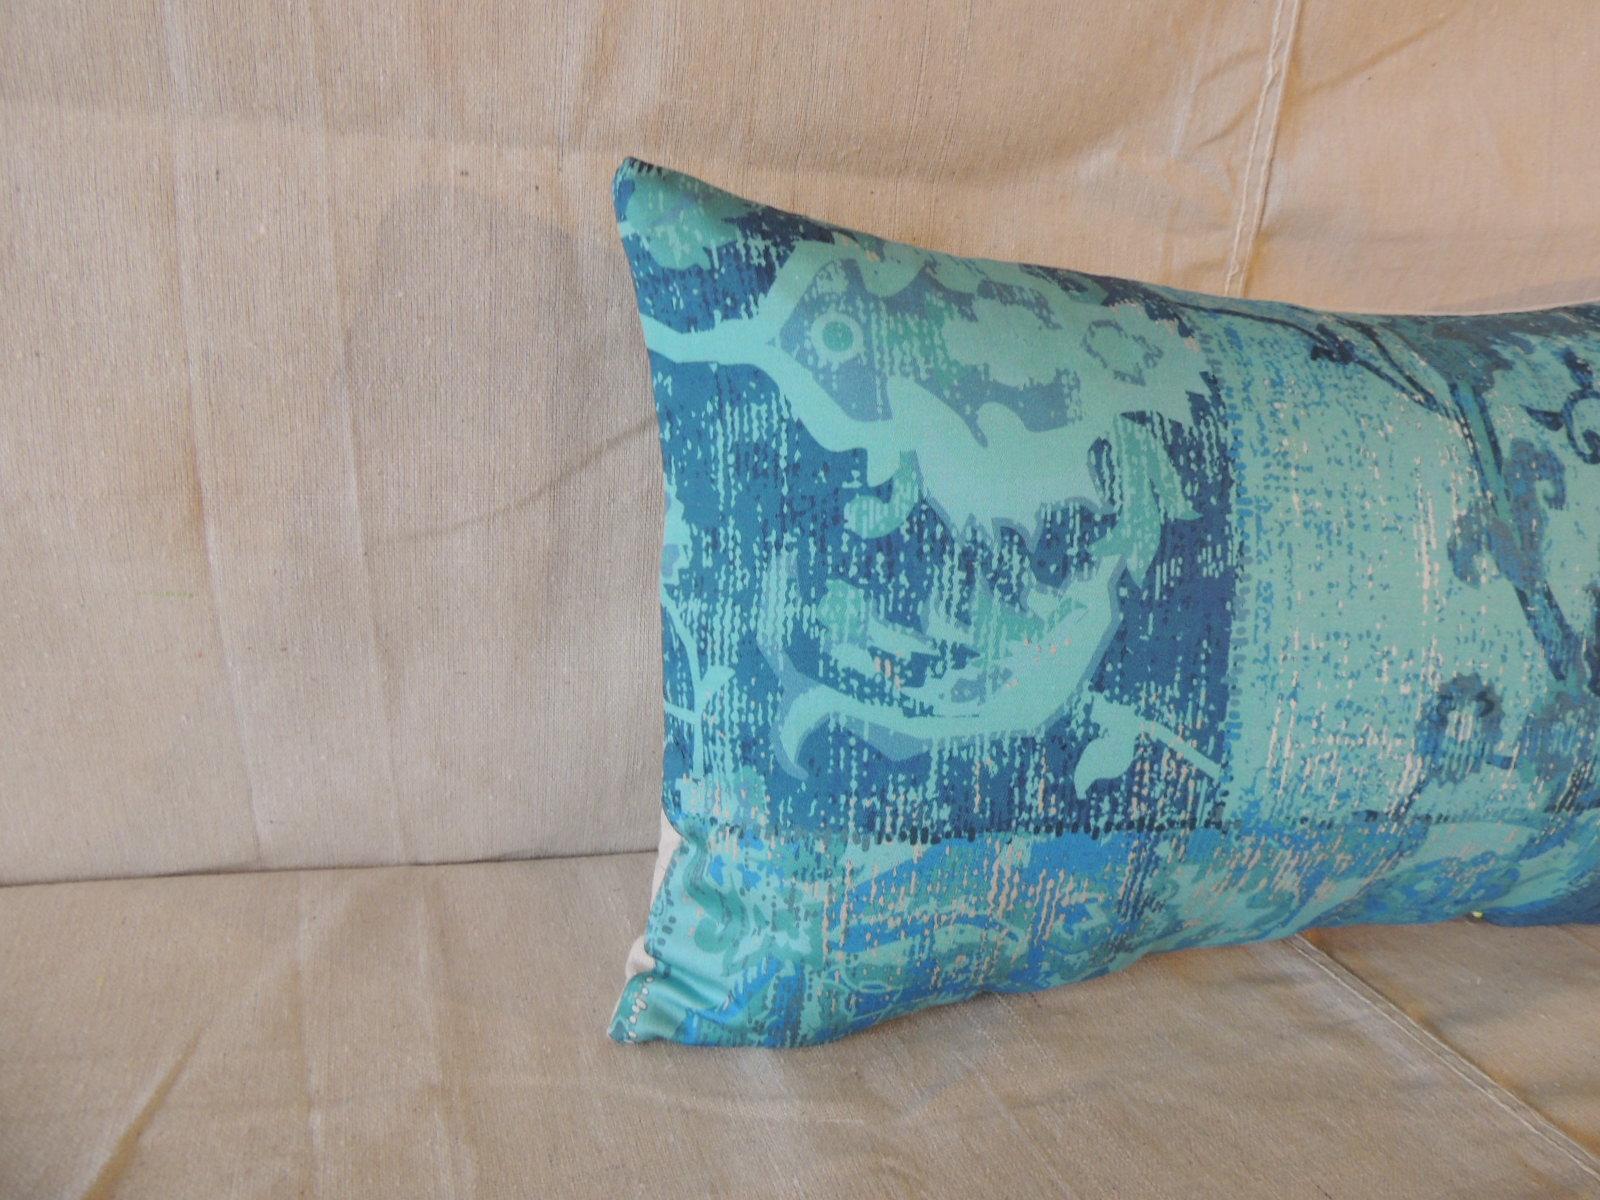 Aqua and blue satin cotton modern Lumbar decorative pillow.
Light grey cotton backing. Back seam at bottom of the pillow.
Printed floral patchwork style pattern.
Decorative pillow handcrafted in Portugal.
Stitched by hand closure